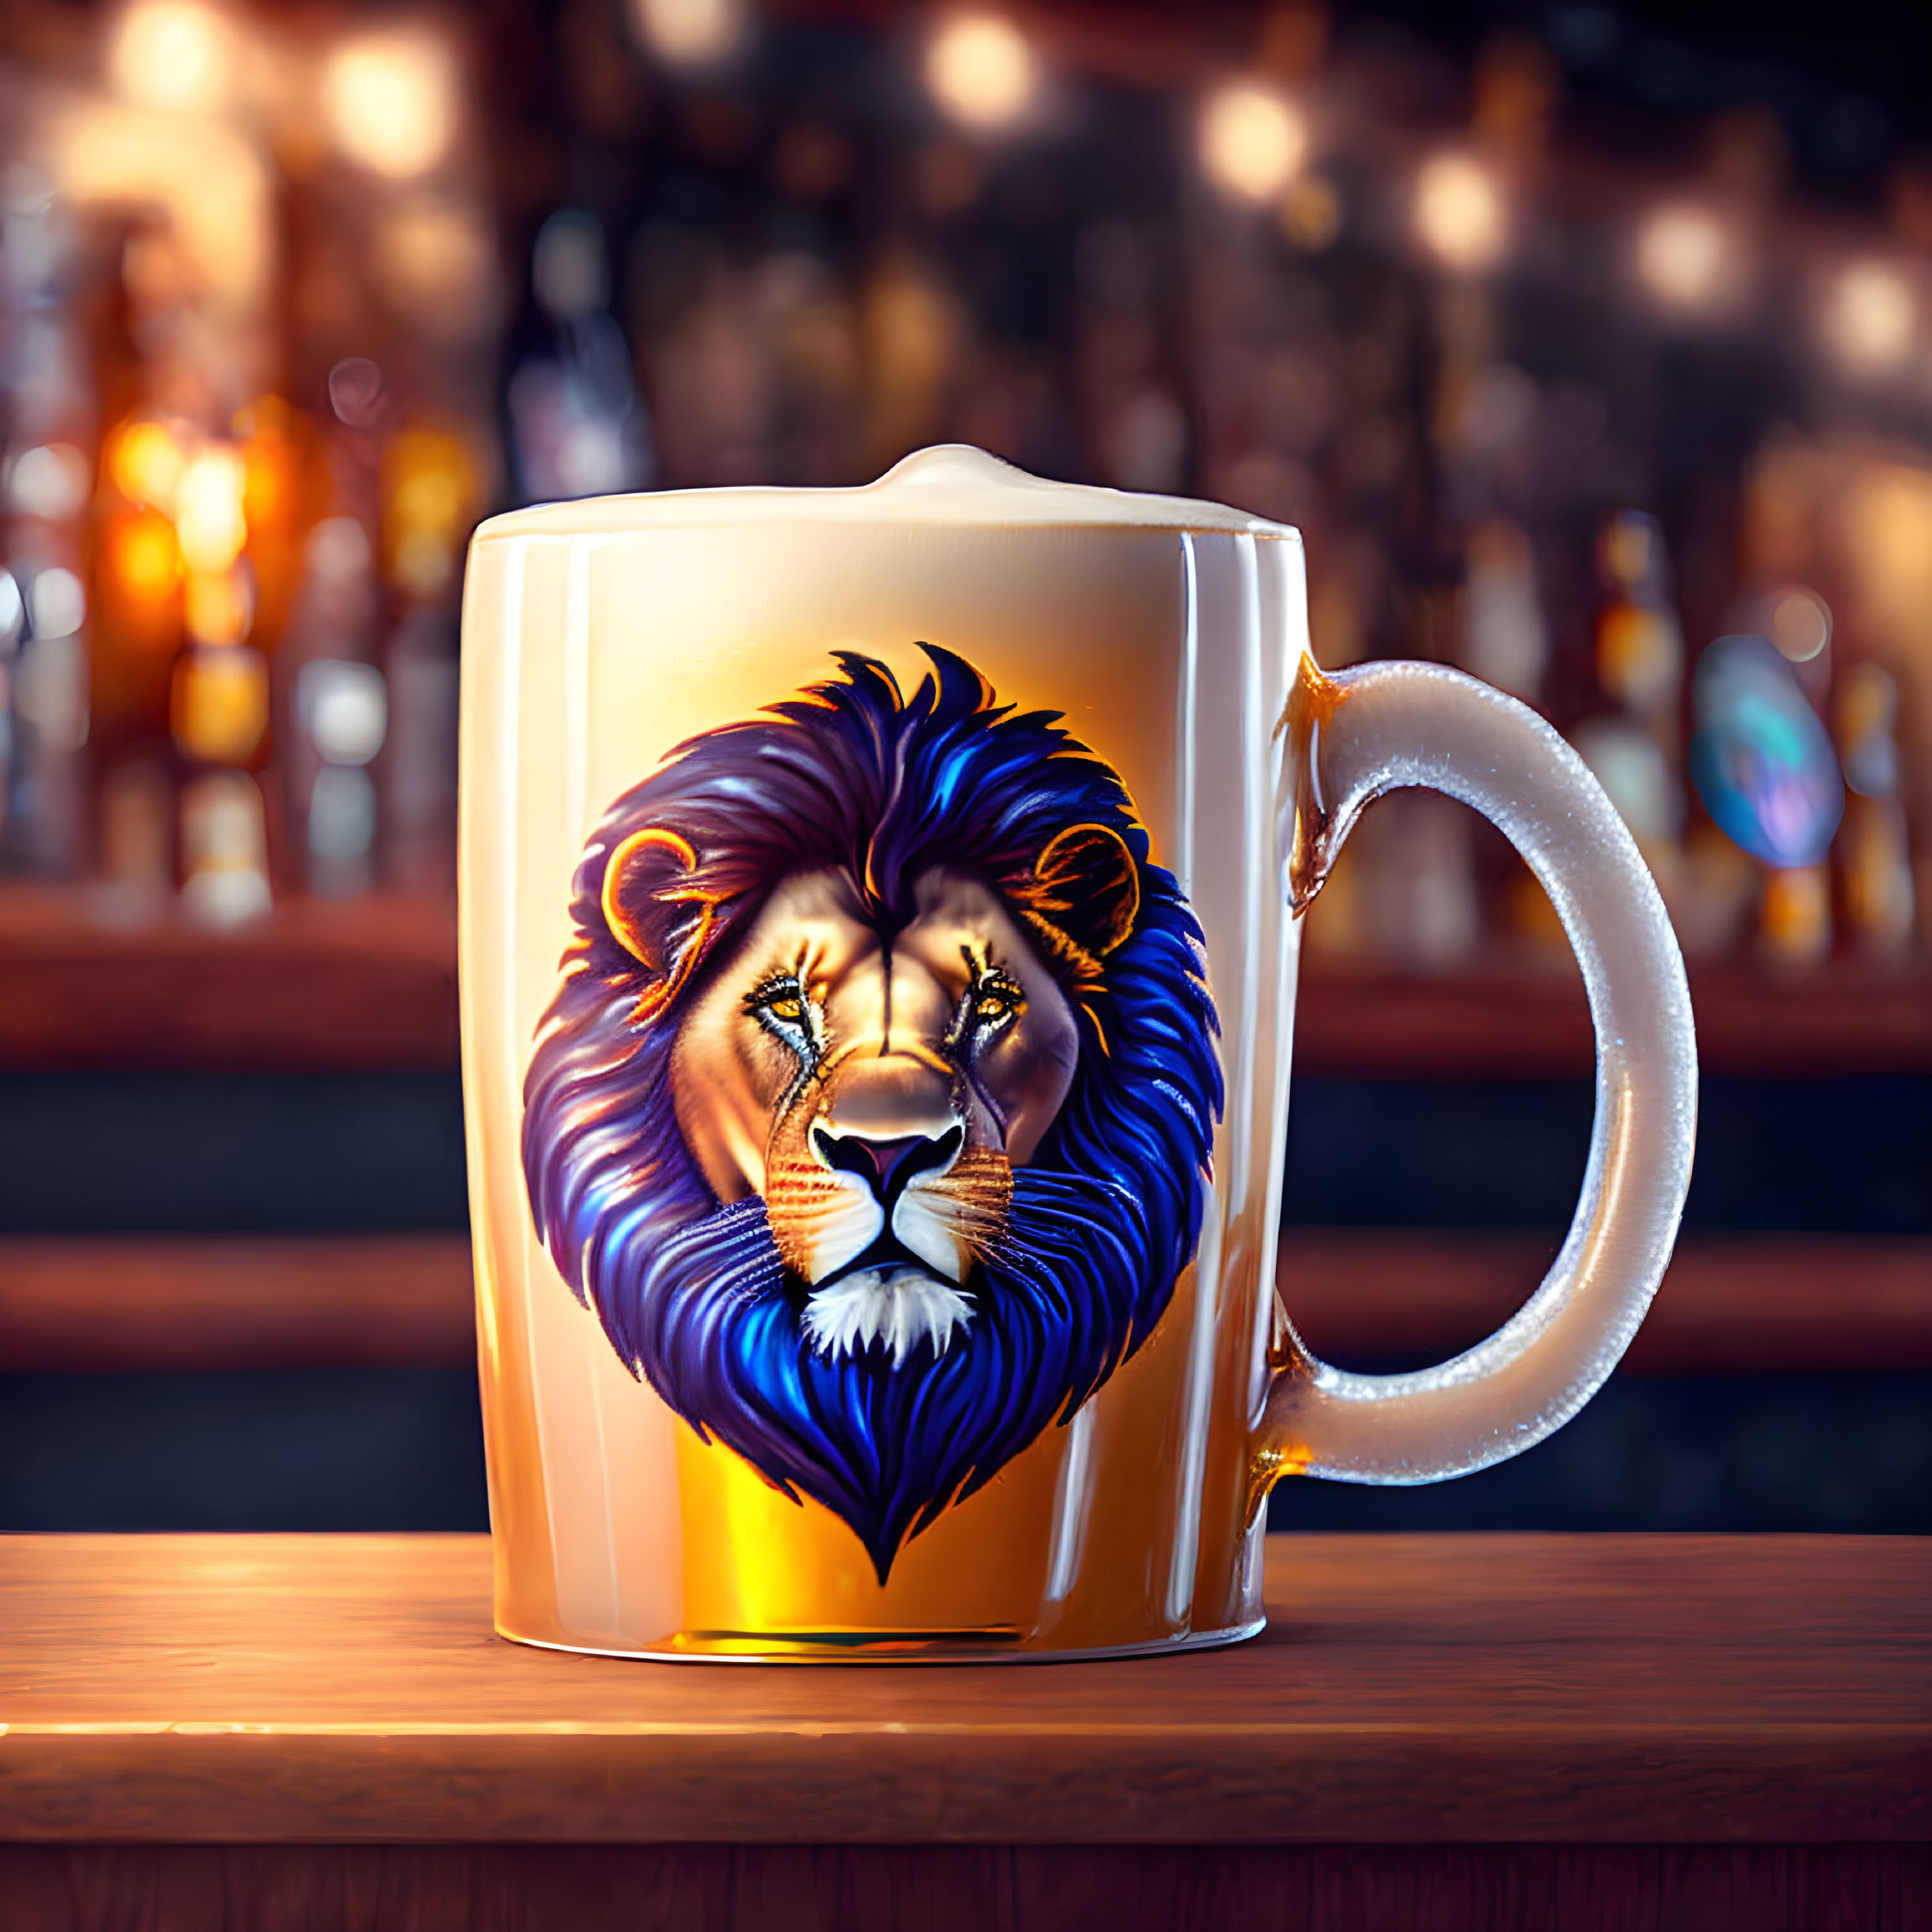 Detailed Lion's Head Illustration on Frosted Beer Mug in Bar Setting